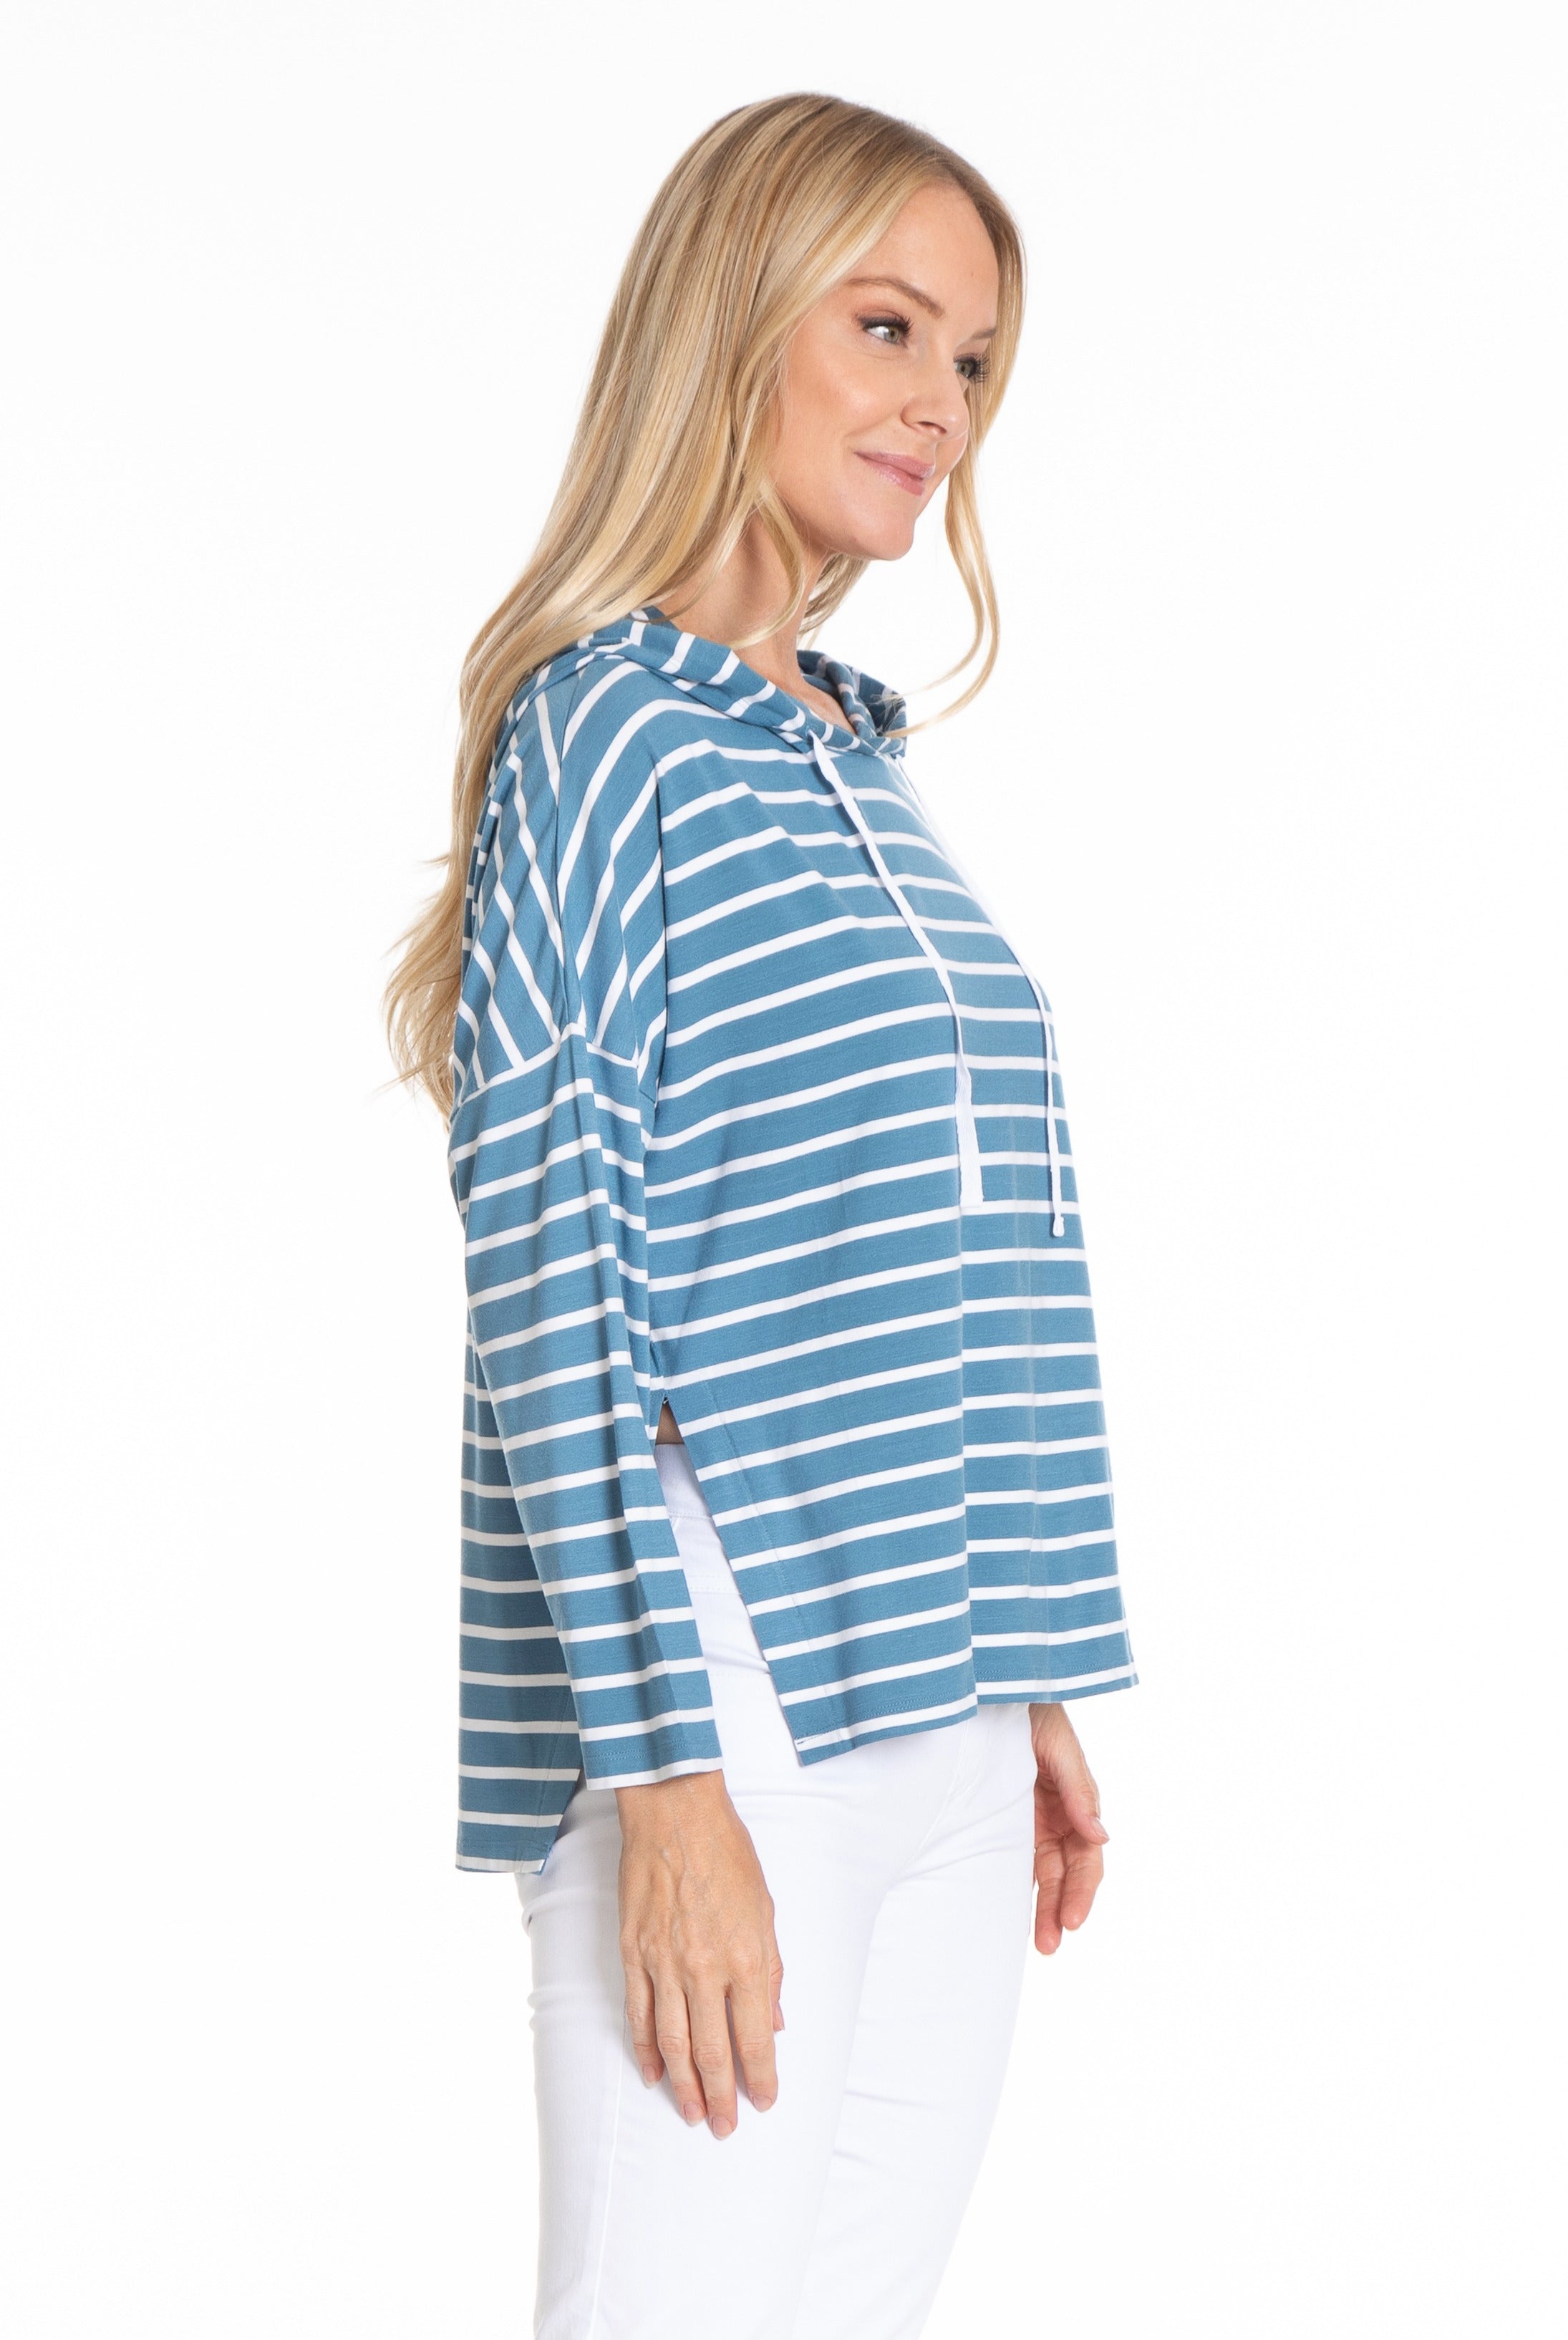 Hoodie With Side Slits Chambray/White Stripe Side APNY